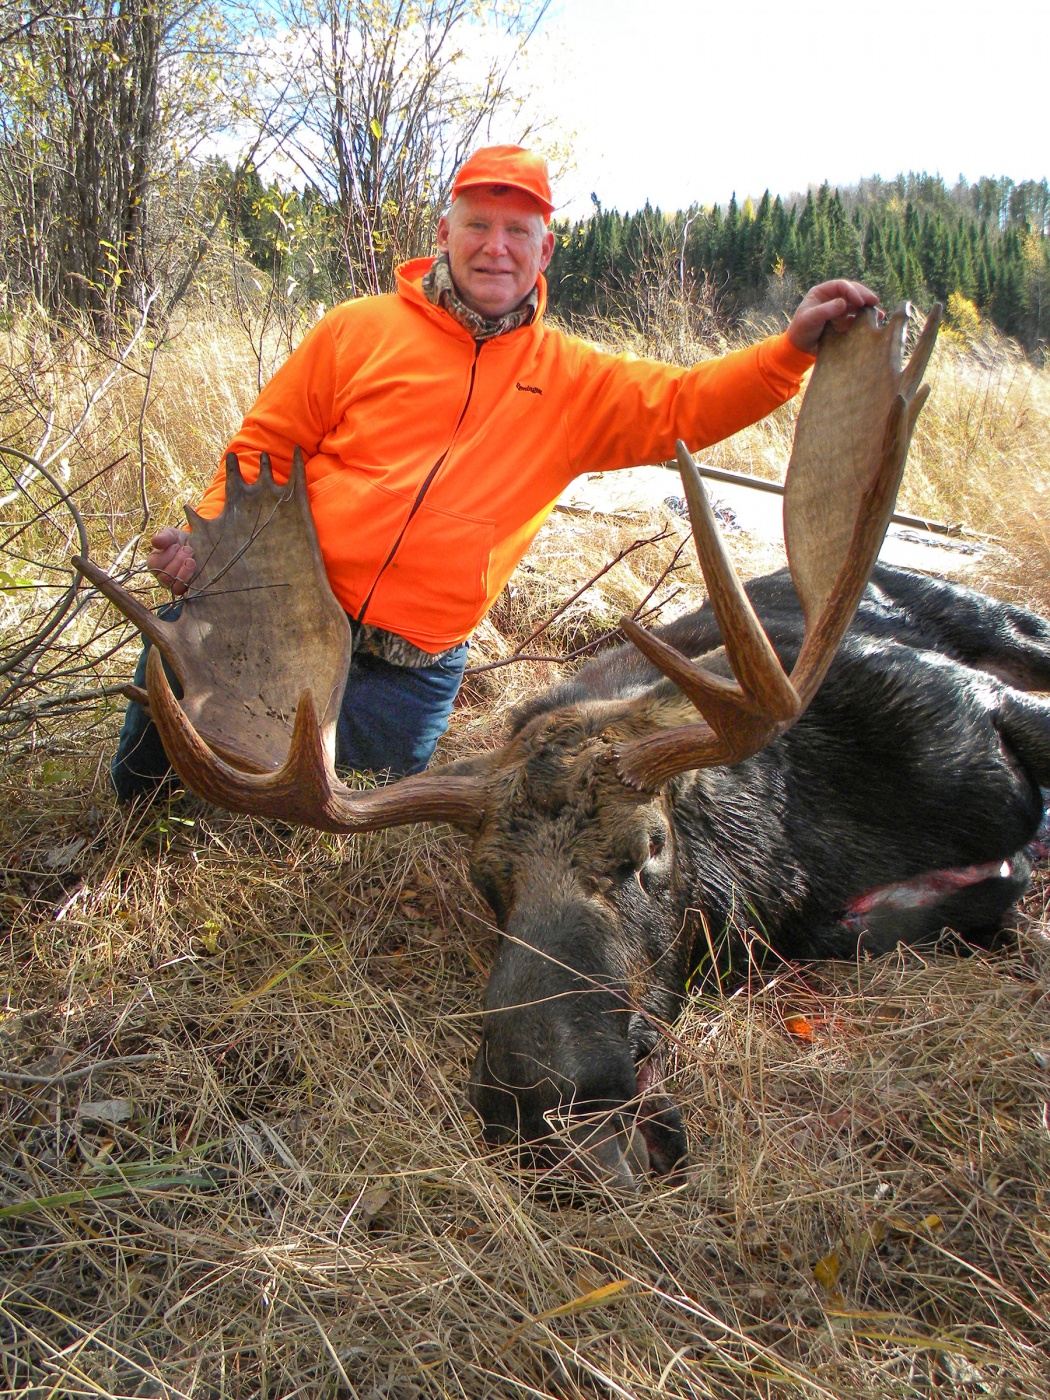 Minnesota wants new hunters to add to states hunting heritage